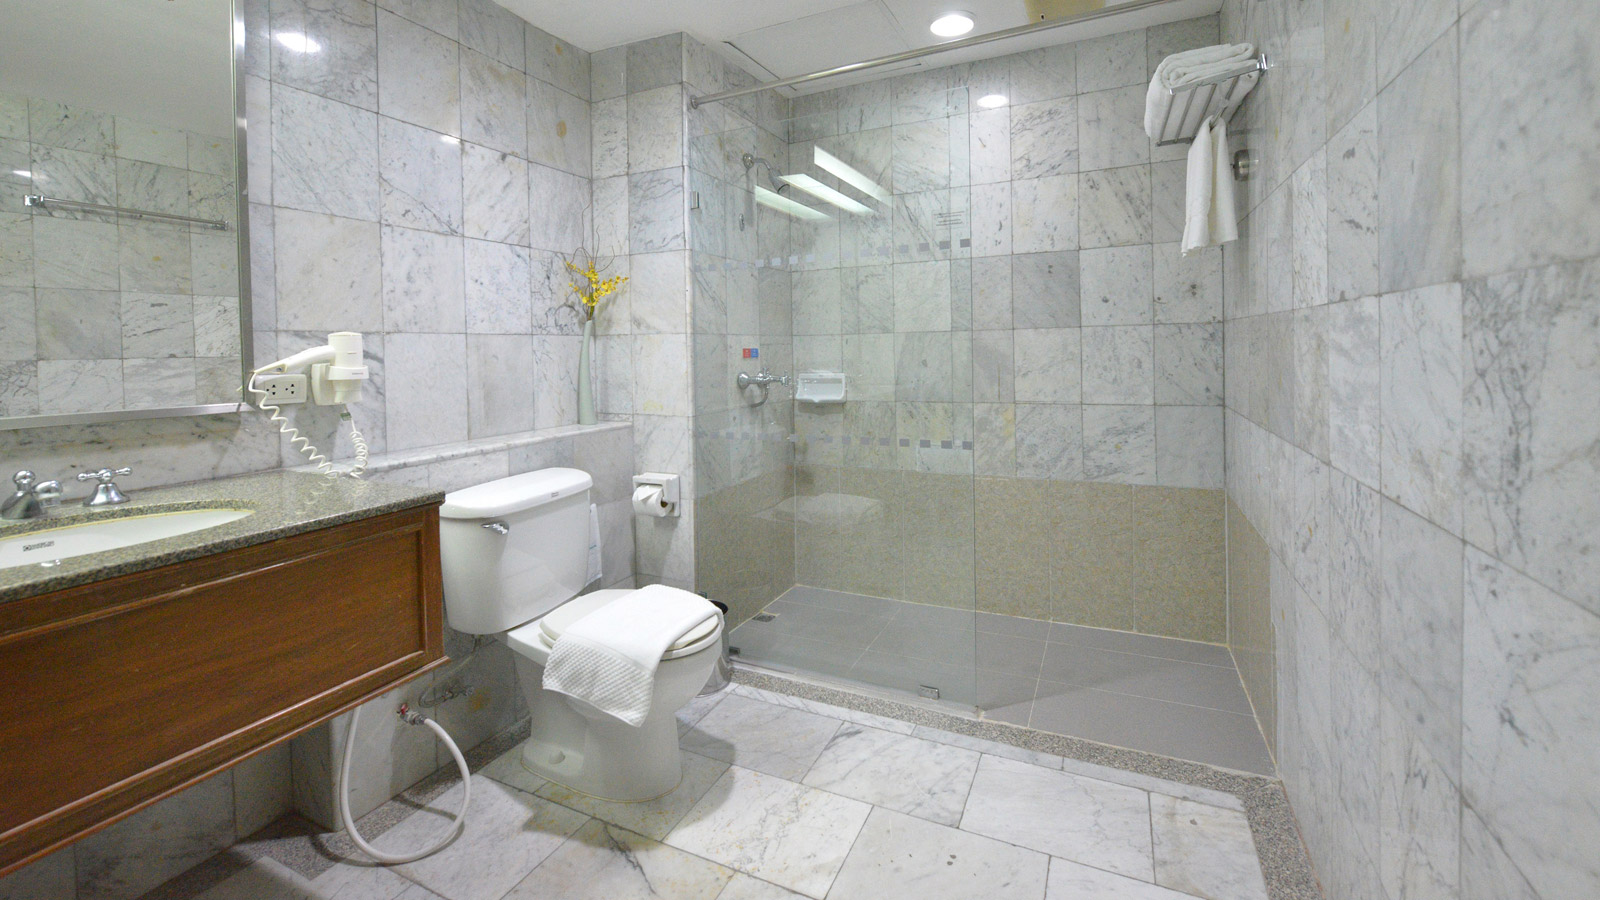 Grand Deluxe - Bathroom at Loei Palace Hotel - 黎府宫殿酒店